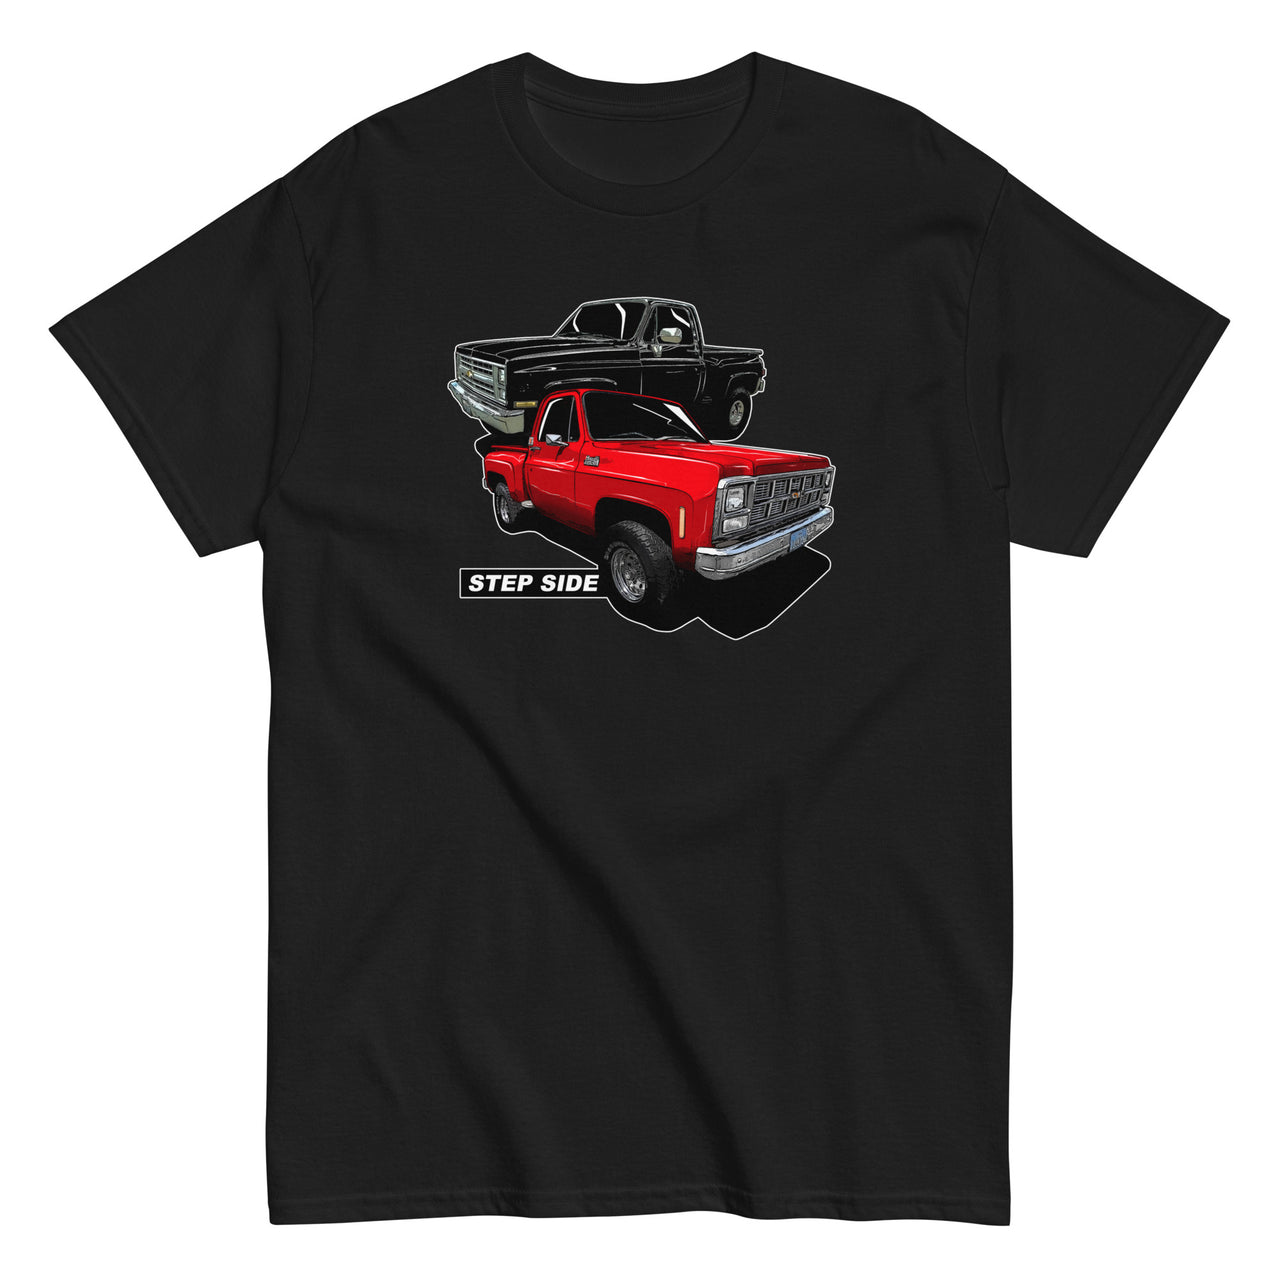 Square Body Step-Side T-Shirt in black